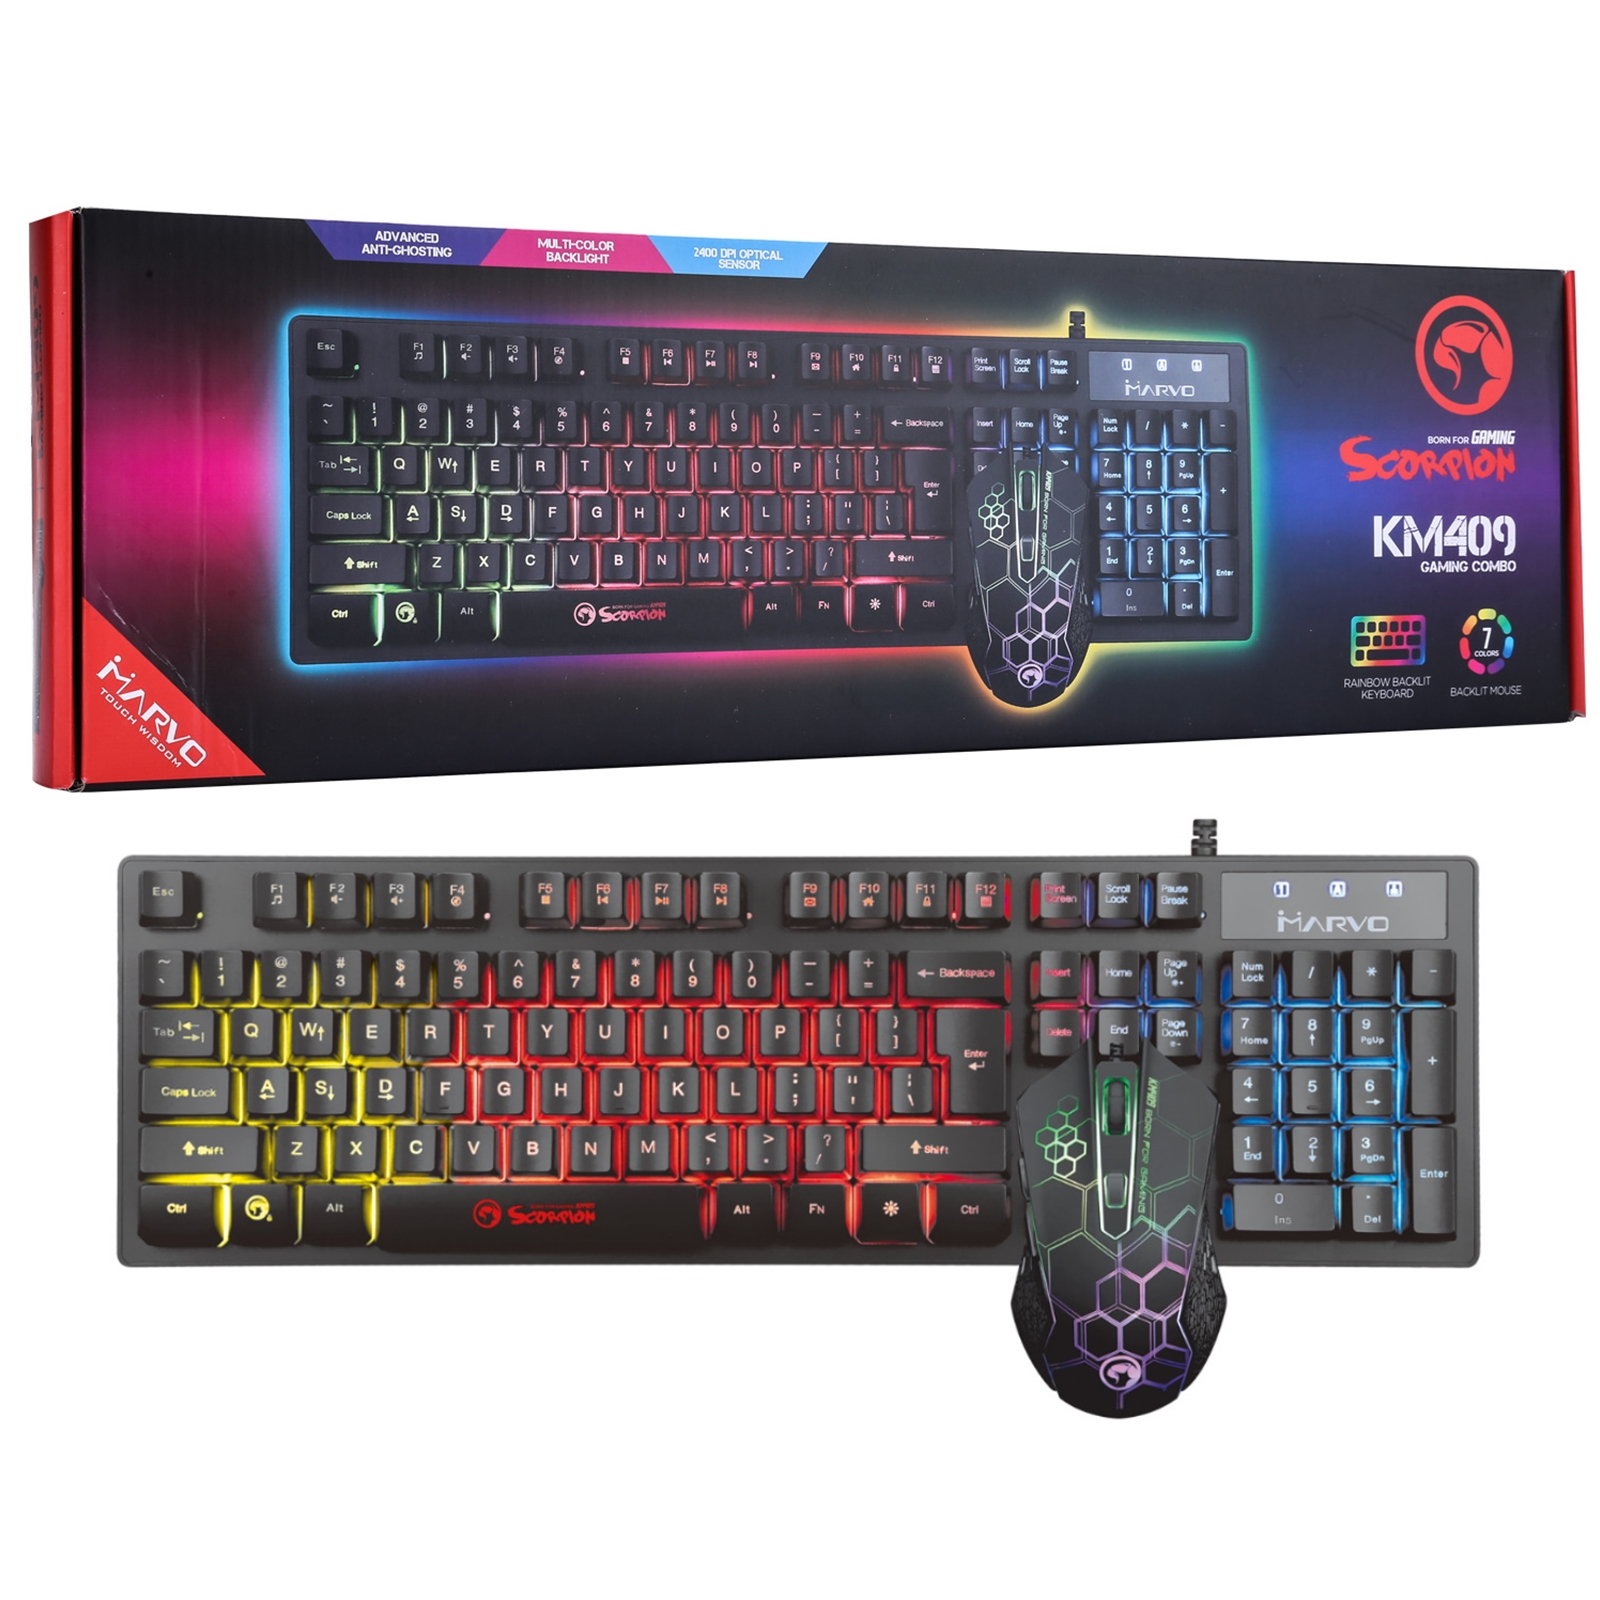 KM409-UK AIT Scorpion KM409 Gaming Keyboard and Mouse Bundle, 7 Colour LED Backlit, USB 2.0, Compact Design, with Multi-Media and Anti-ghosting Keys, Optical Sensor Mouse with Adjustable 800-2400 dpi